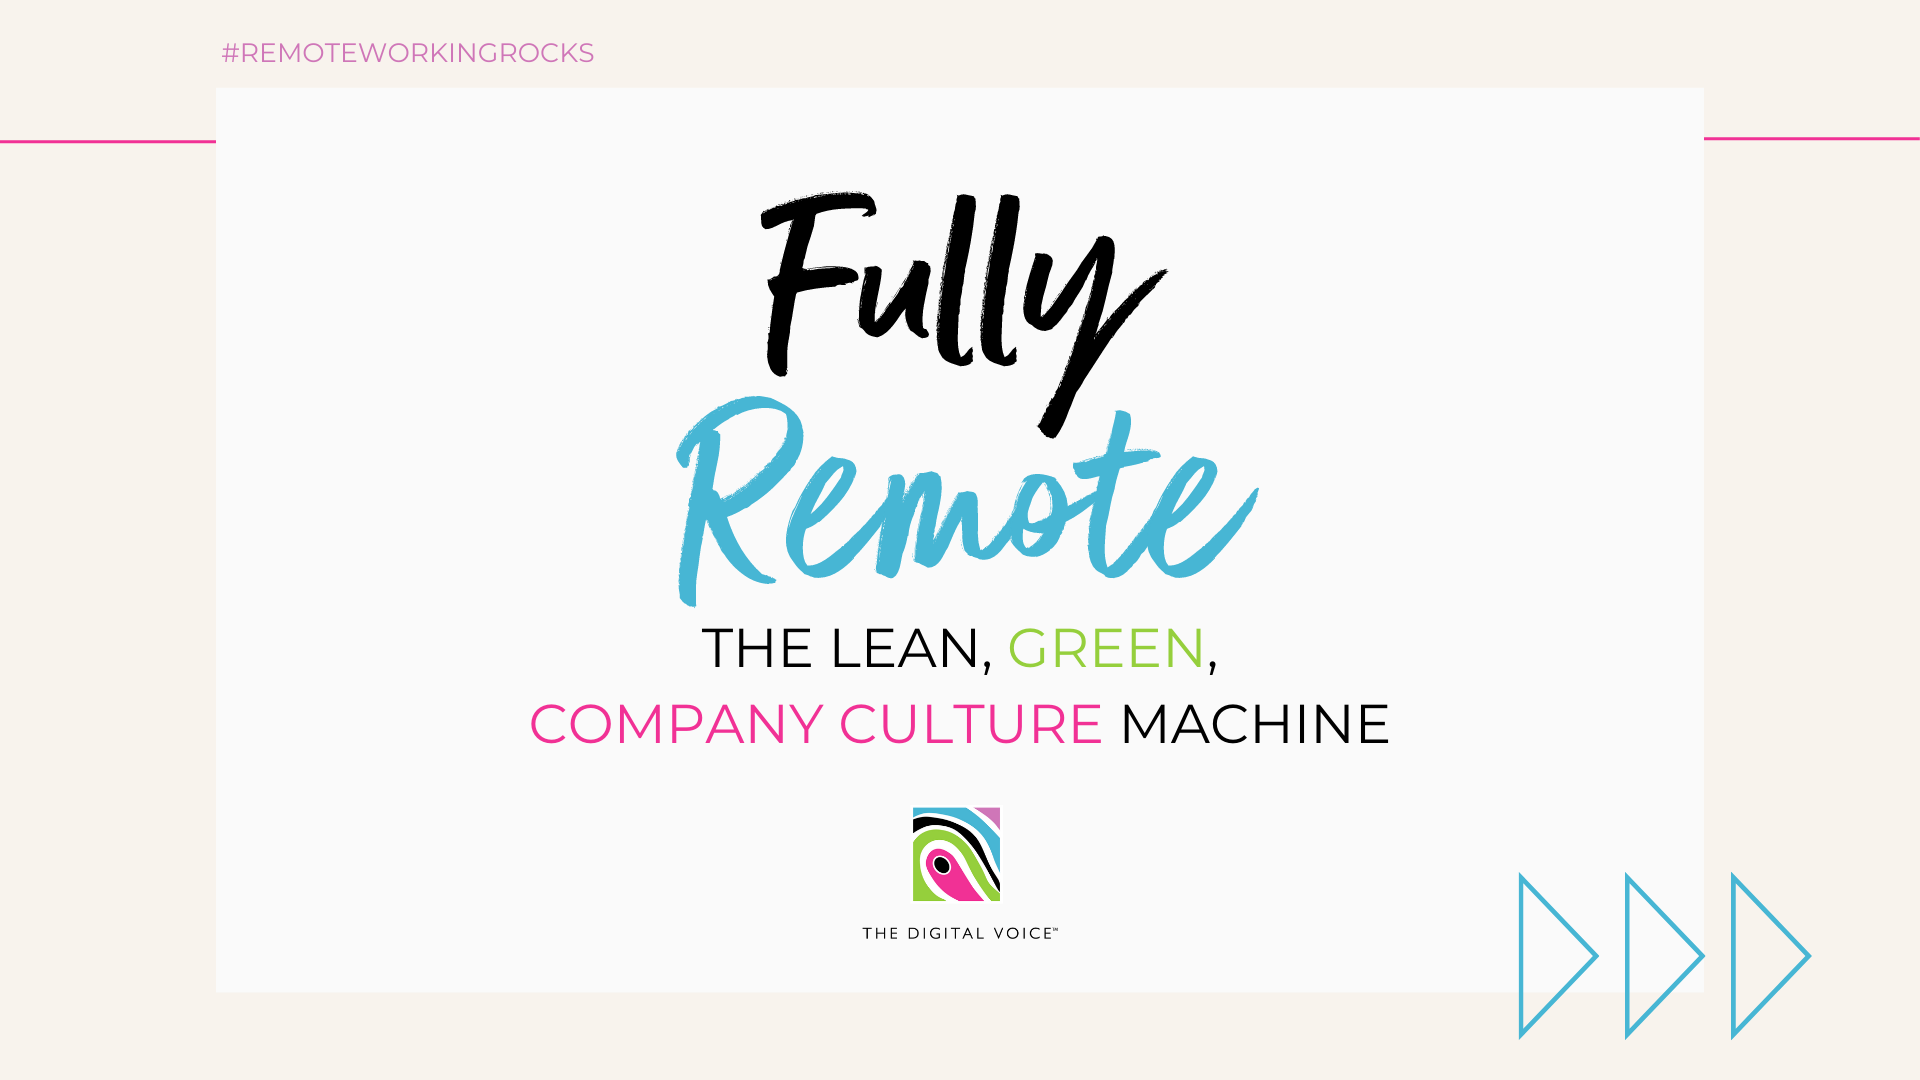 Fully Remote: The Lean, Green, Company Culture Machine – a blog about remote working